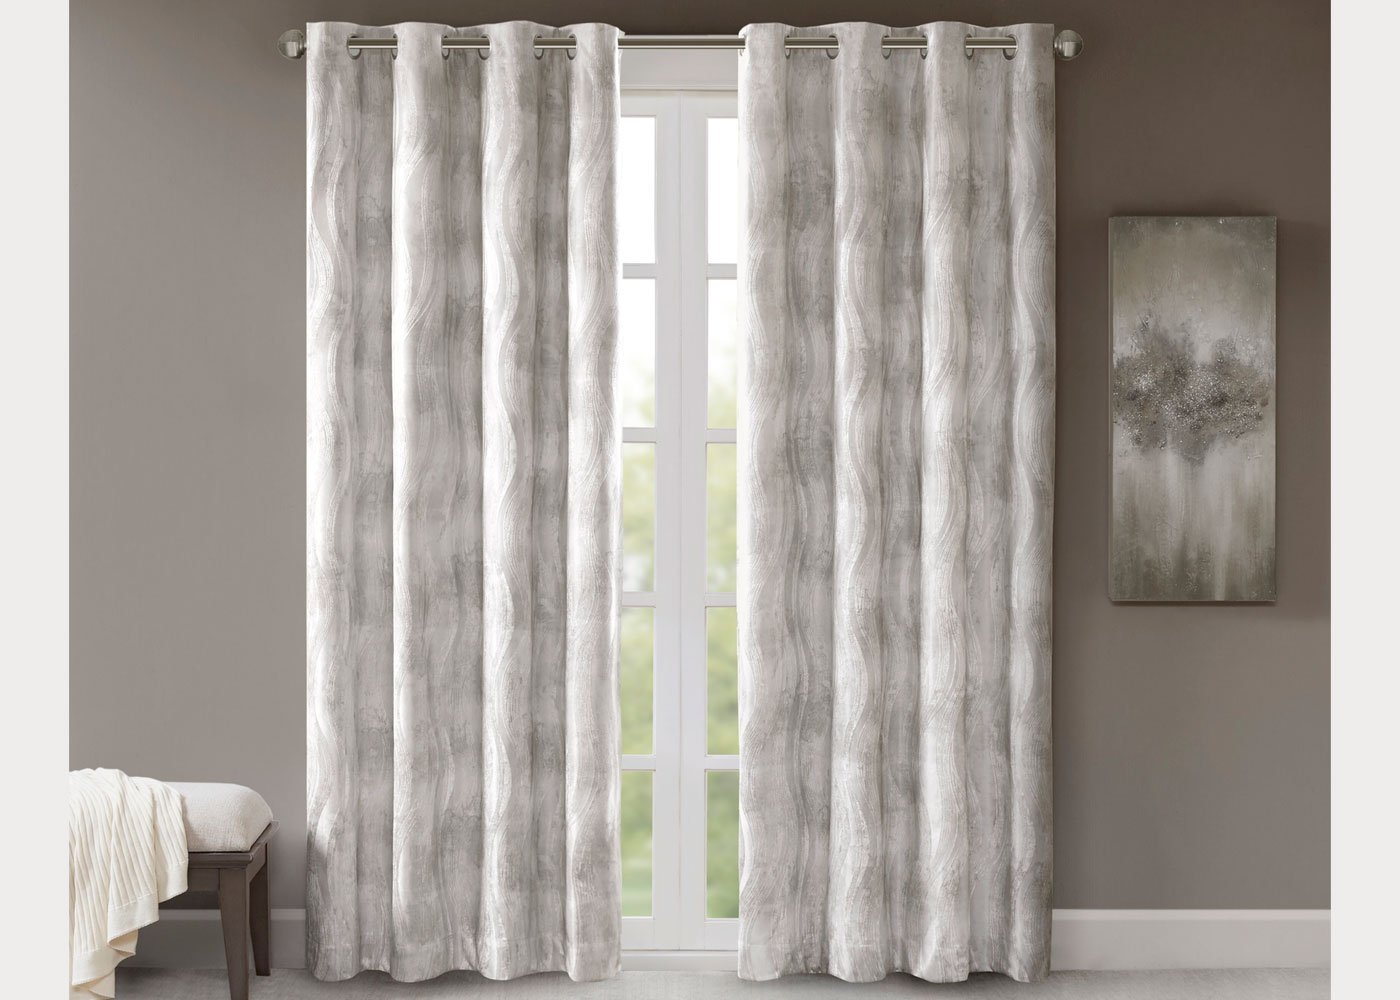 Victorio Printed Jacquard Total Blackout Grommet Top Curtain Panel by SunSmart